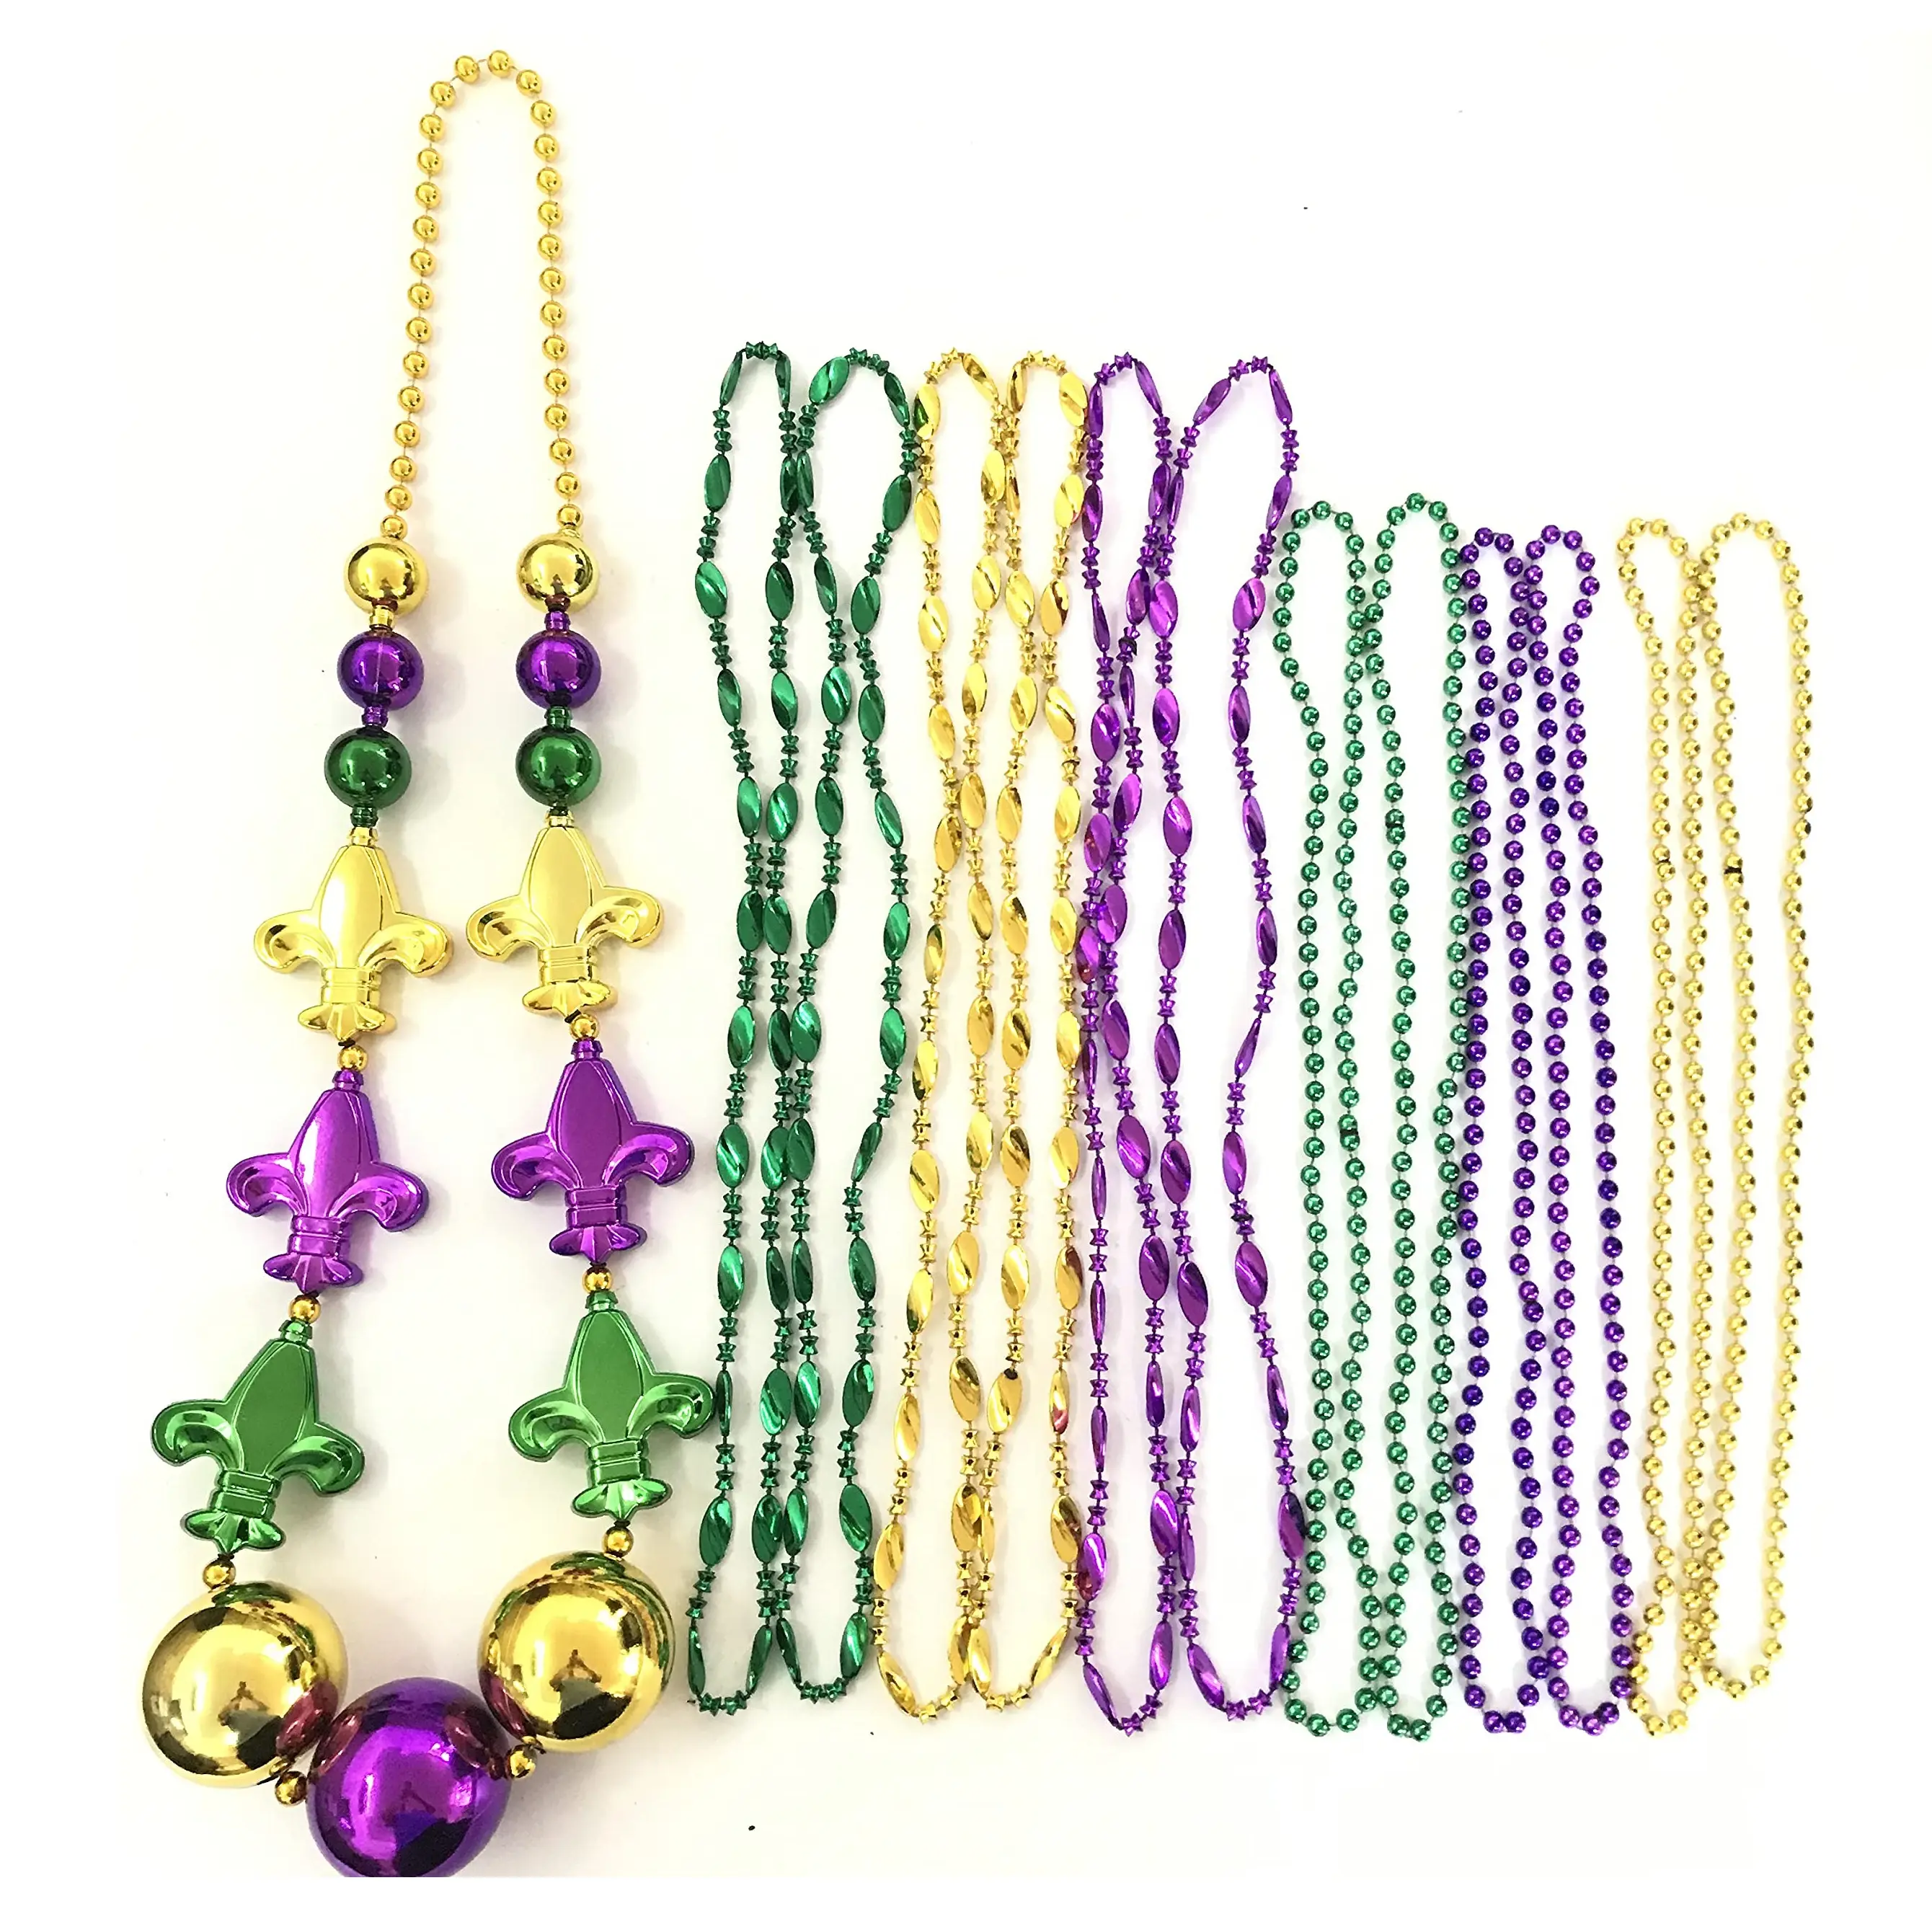 Mardi Gras Beads Set Necklaces Metallic Purple Gold Green For Masquerade Costume Party Favors Supplies(13 Pcs) SP-8